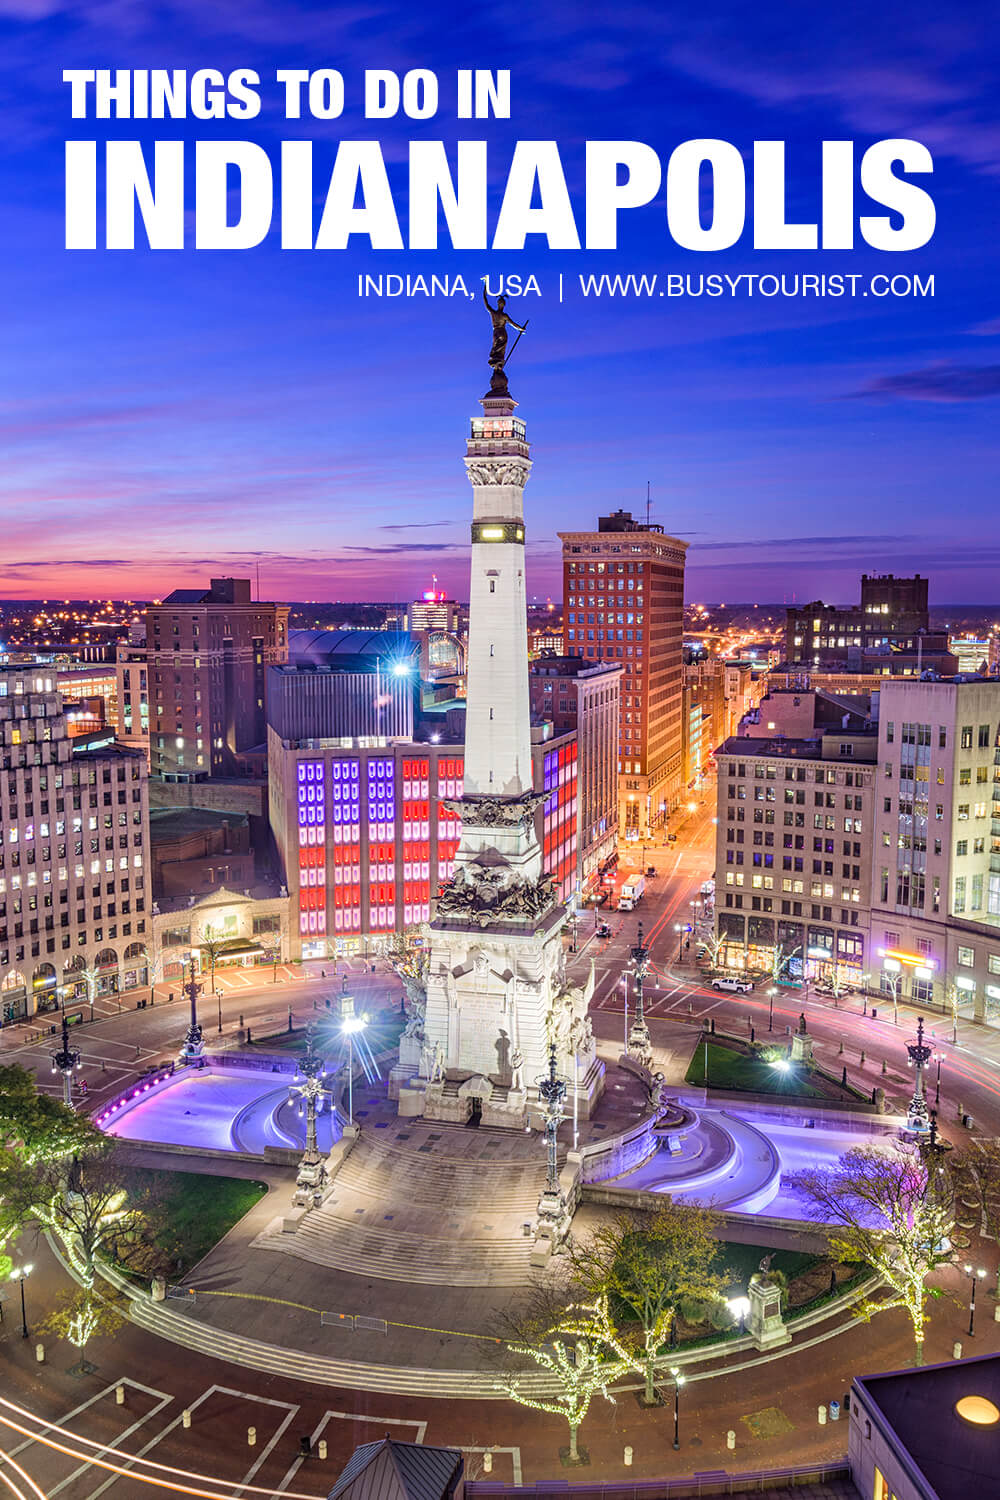 places to visit at indianapolis